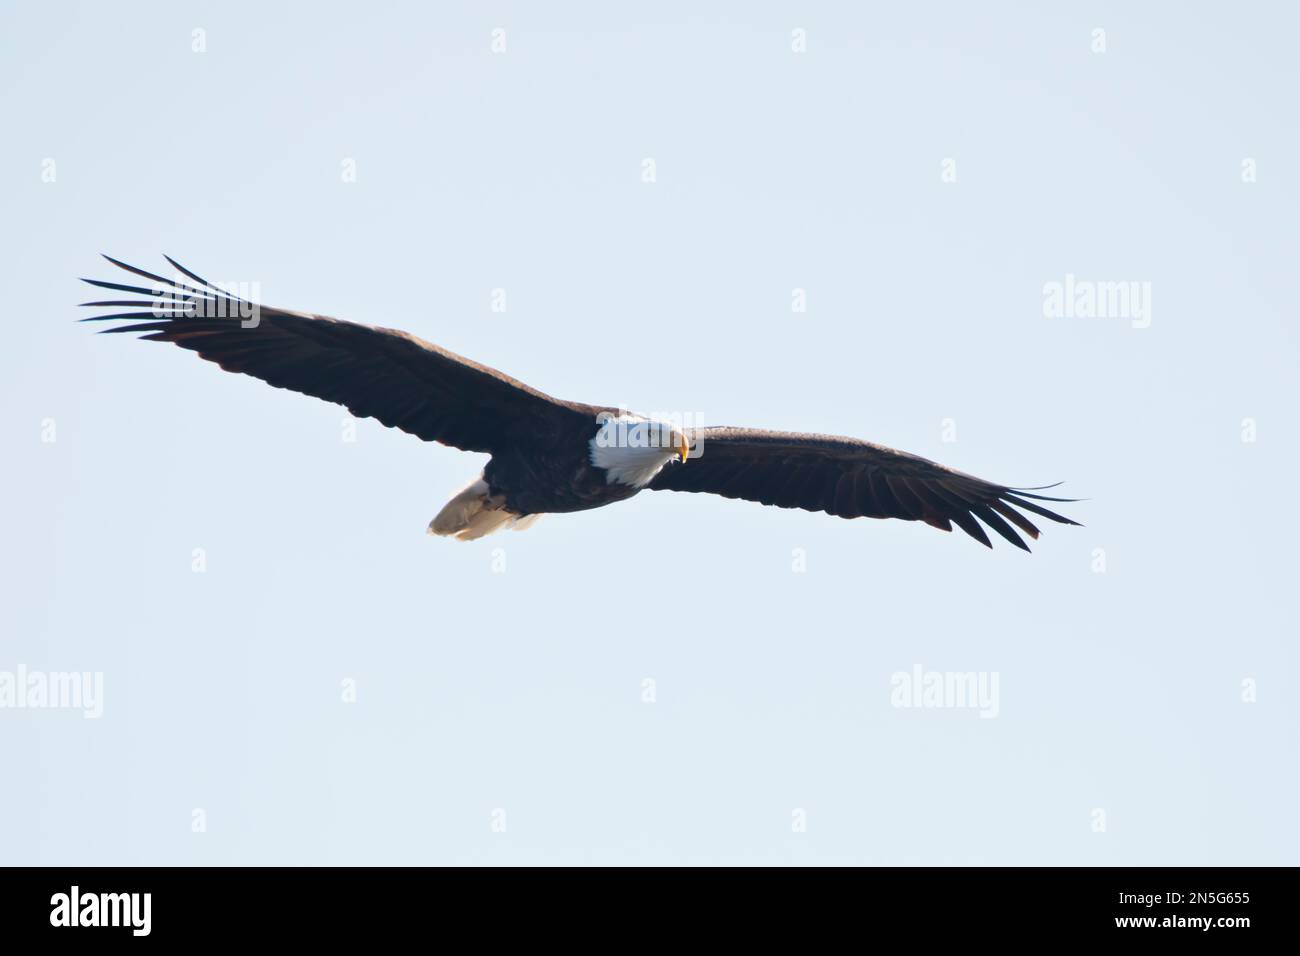 Front view of an American bald eagle soaring with spread wings in the blue sky in Davenport, Iowa on a winter day, close up photo Stock Photo